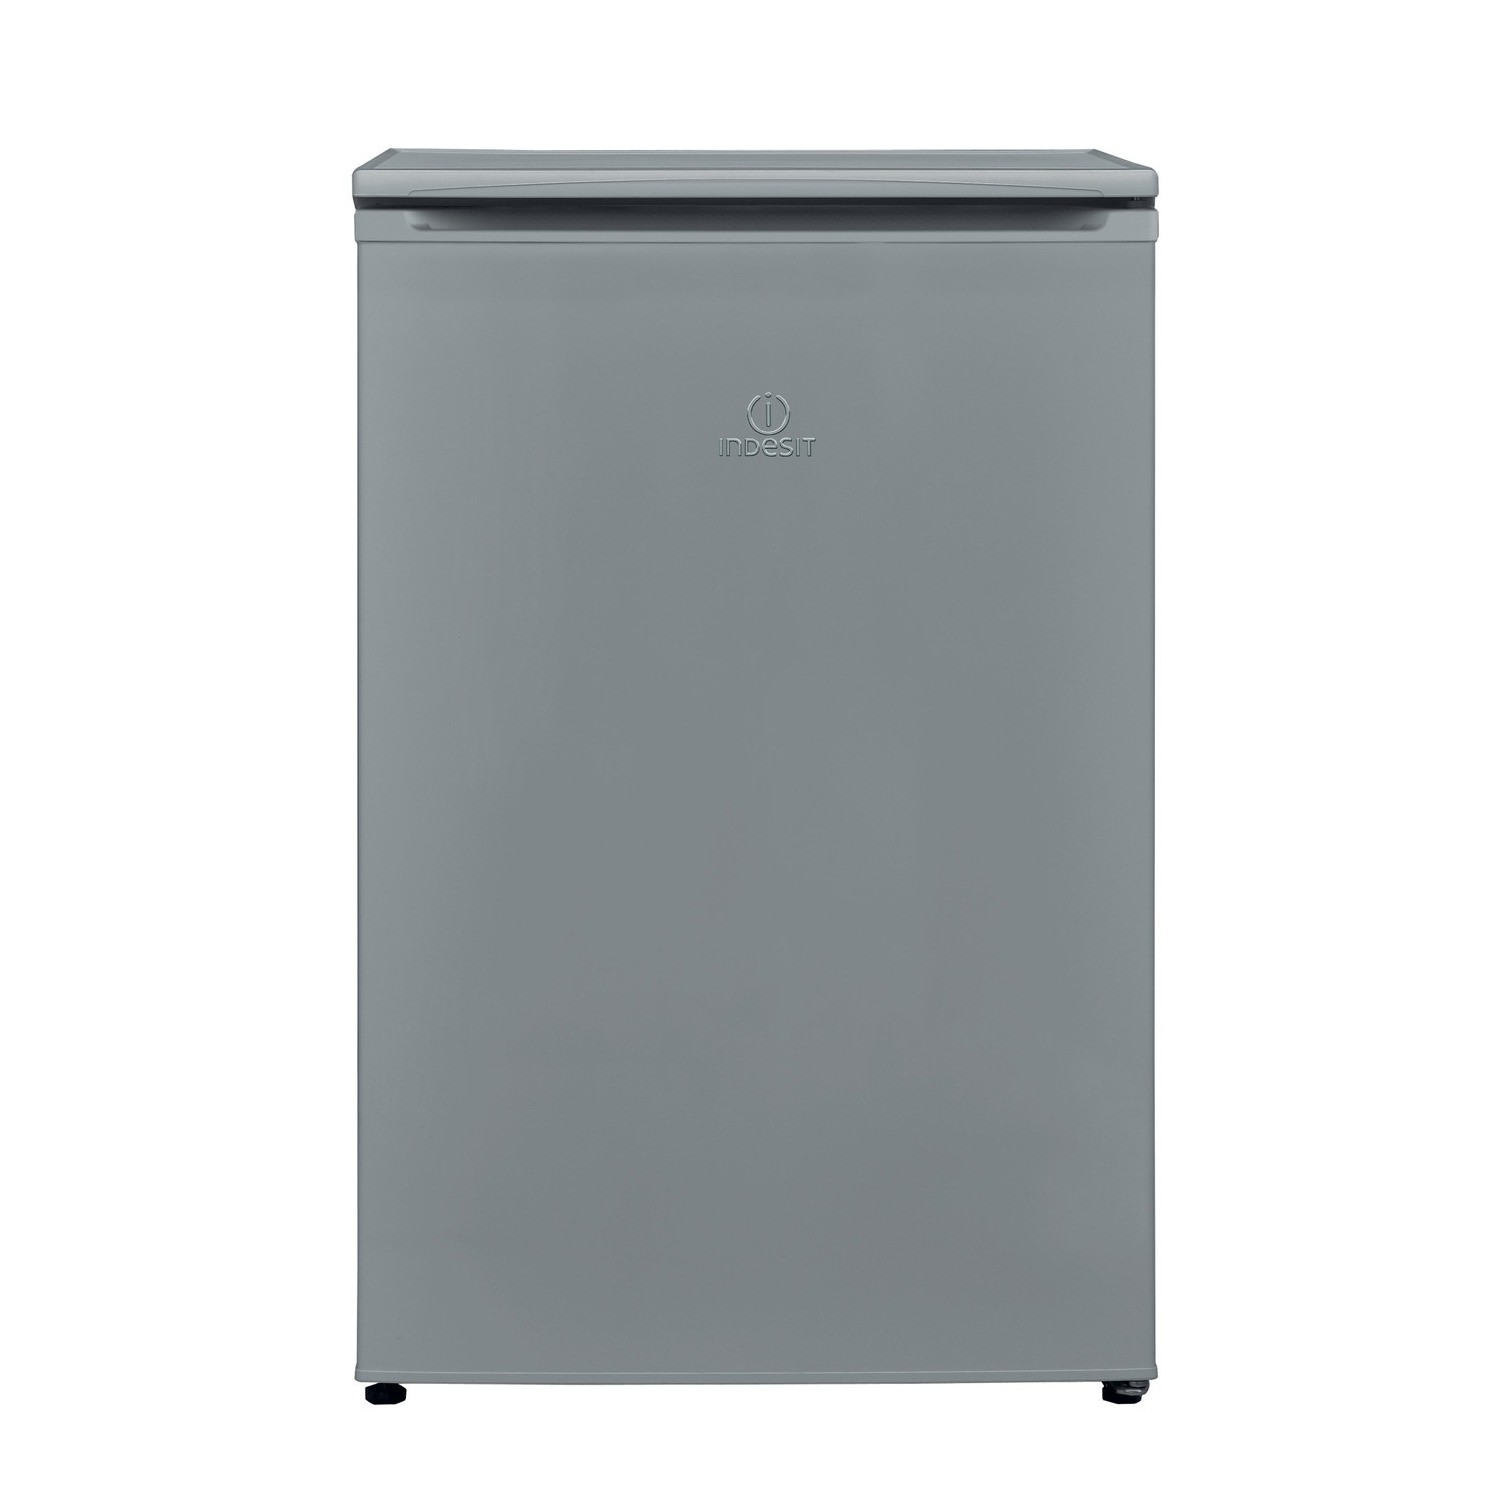 Photos - Other for Computer Indesit 102 Litre Freestanding Under Counter Freezer - Silver I55ZM1120S 